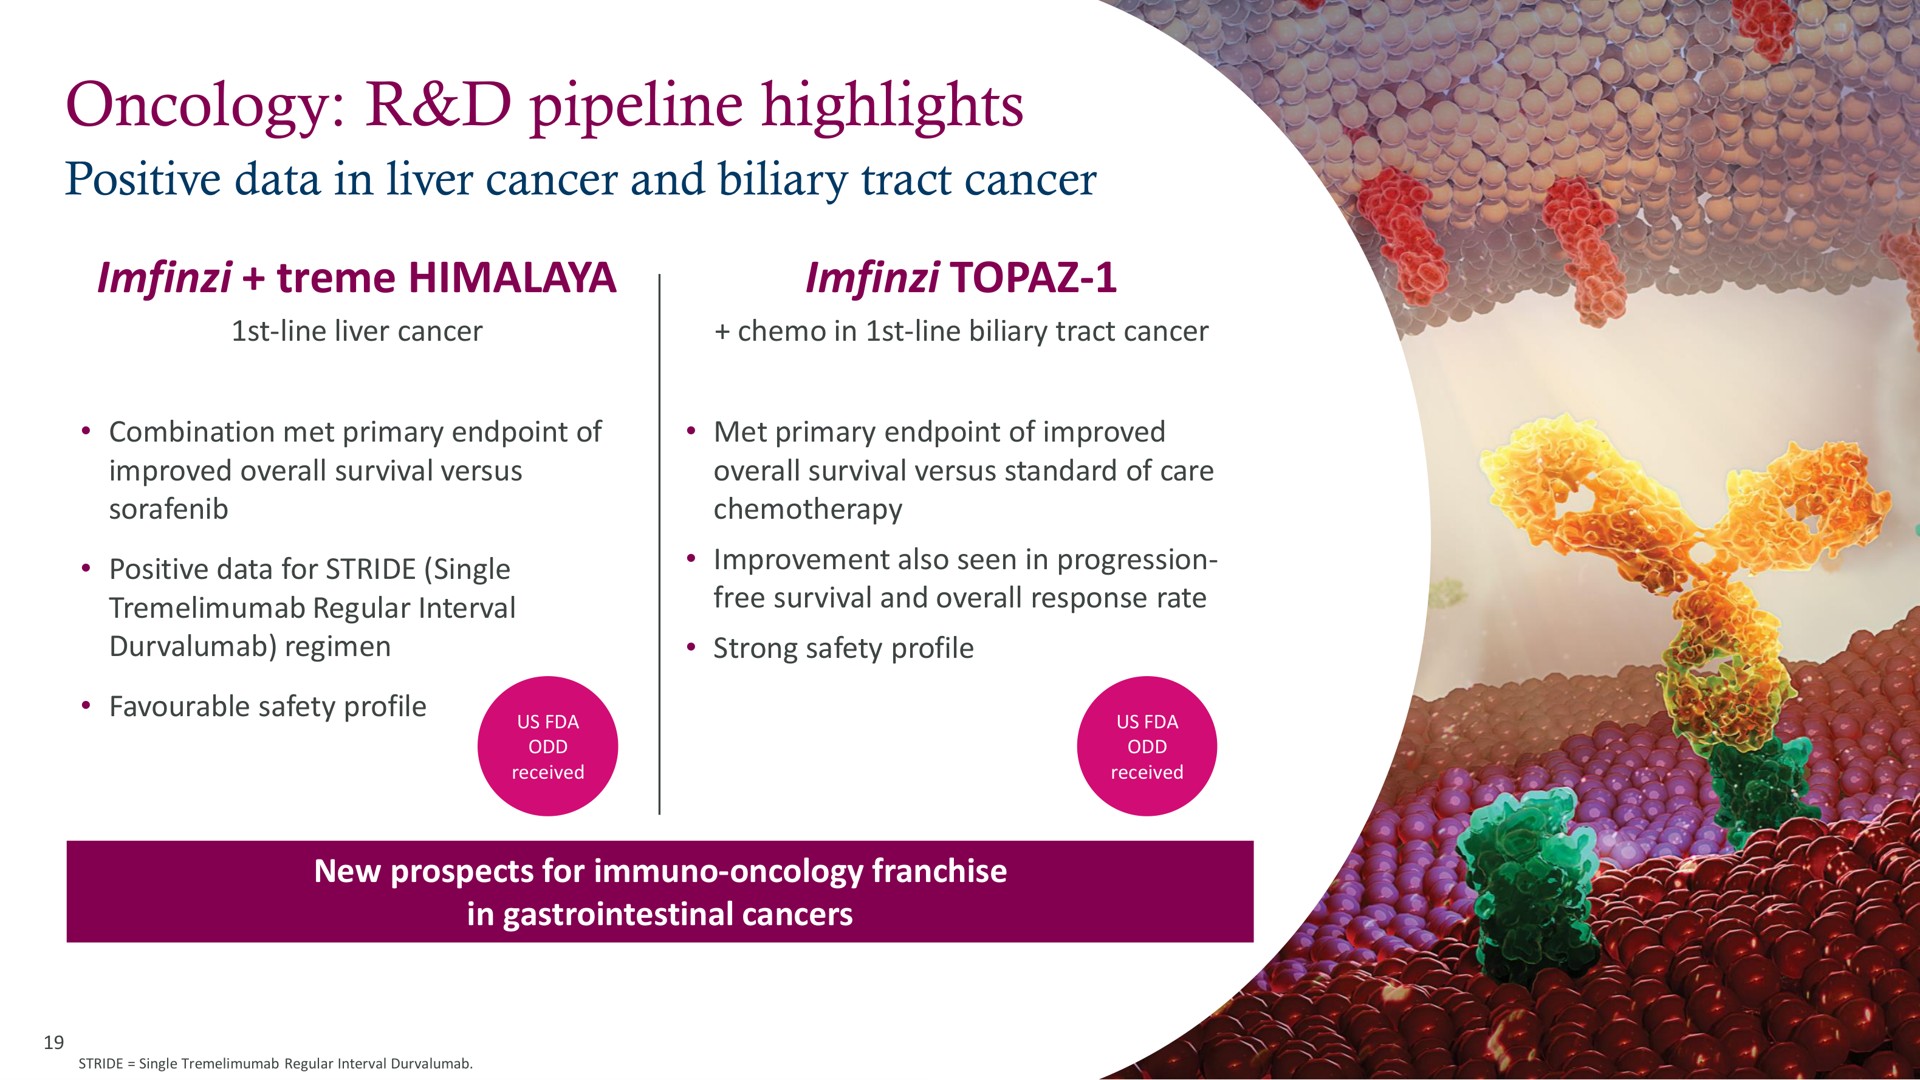 oncology pipeline highlights | AstraZeneca